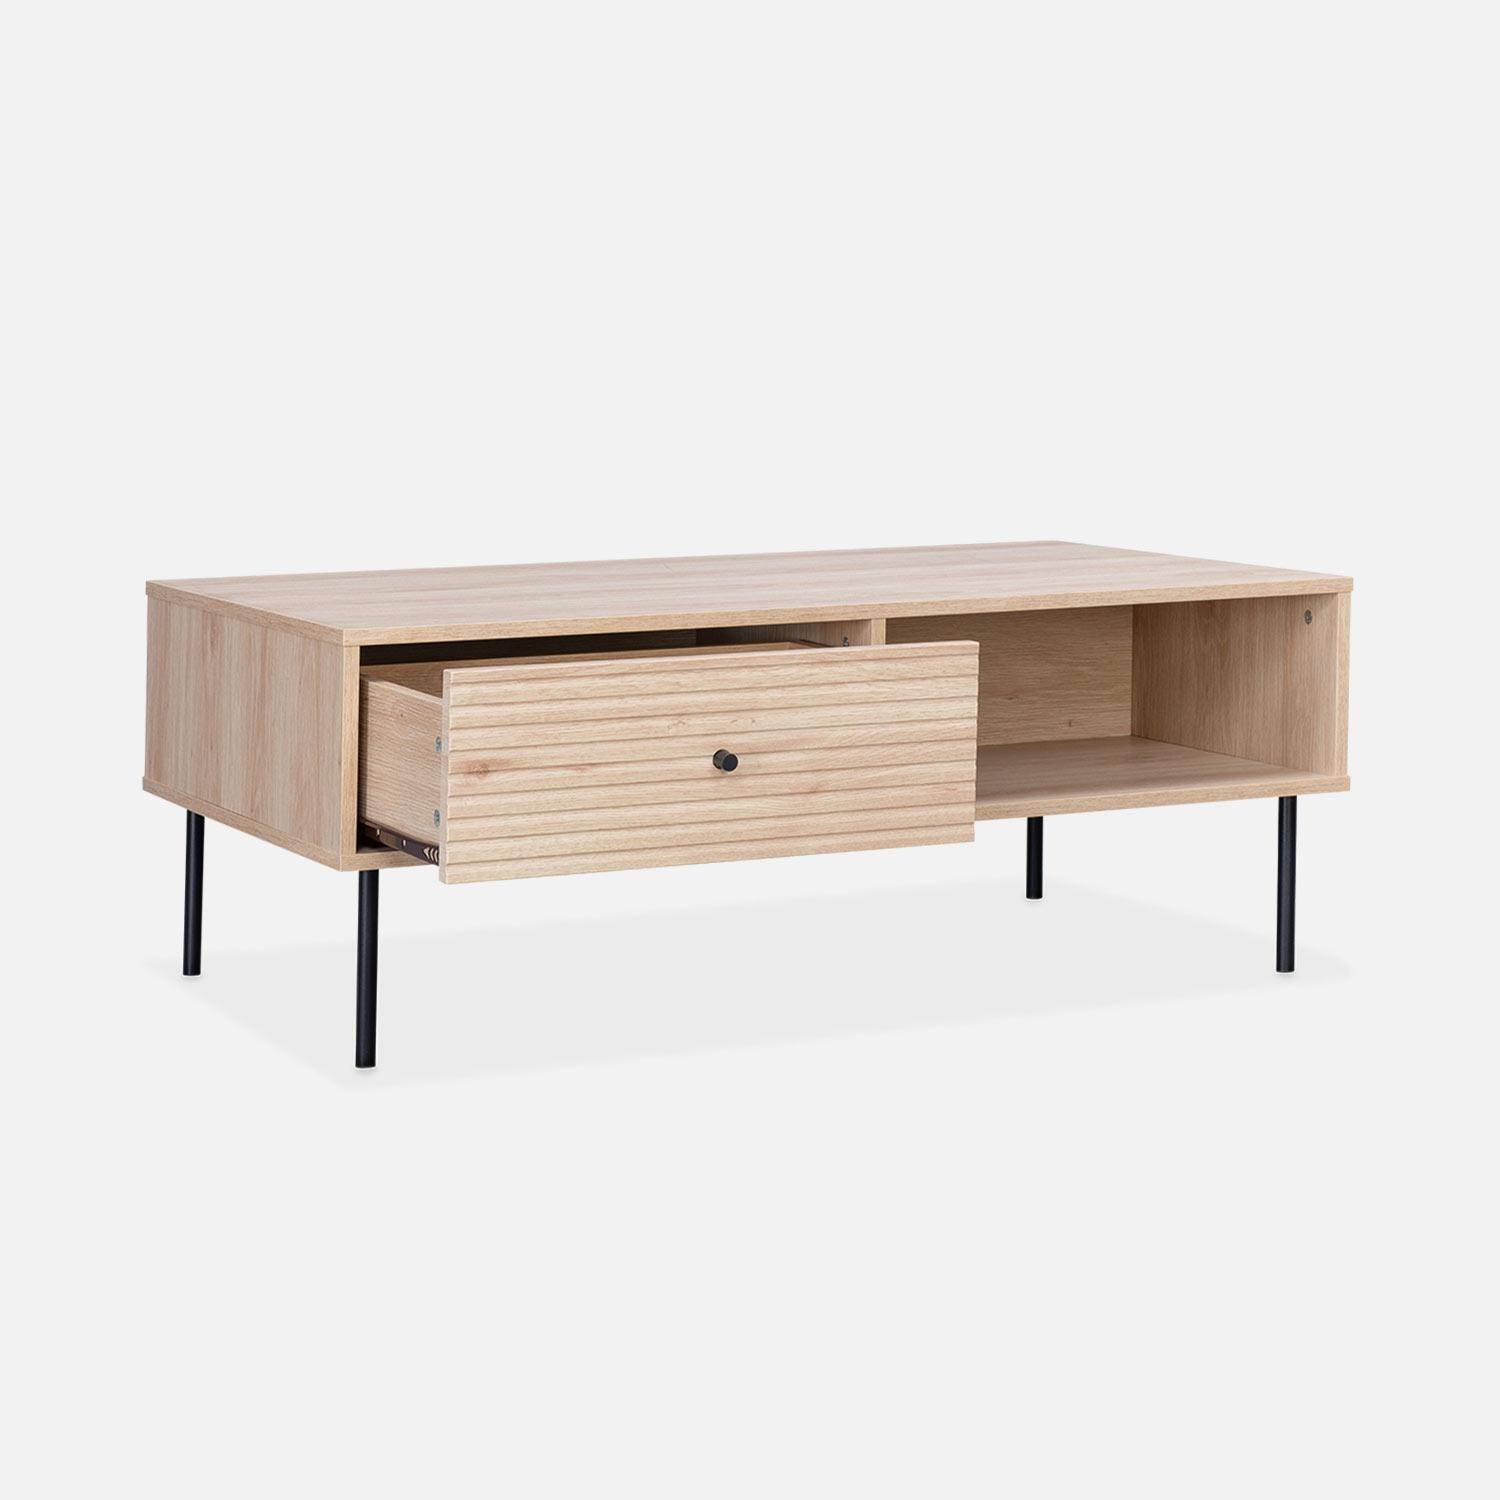 Grooved wood-effect coffee table with one drawer and storage nook, 110x59x41cm - Braga - Natural Photo6